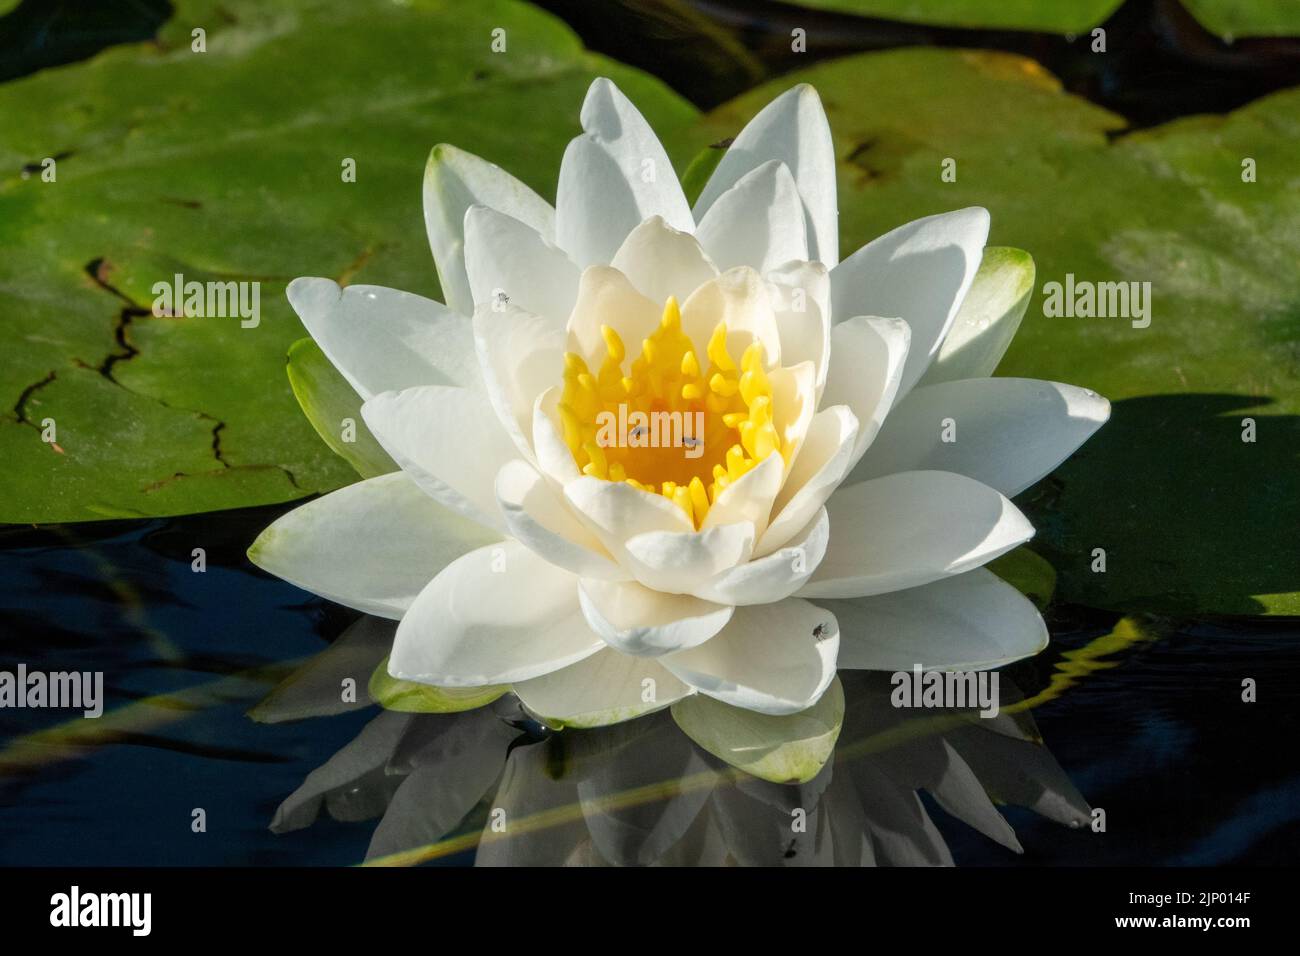 Issaquah, Washington, USA.  Fragrant water lily, Nymphaea odorata, considered a Class C noxious weed in this area. Stock Photo